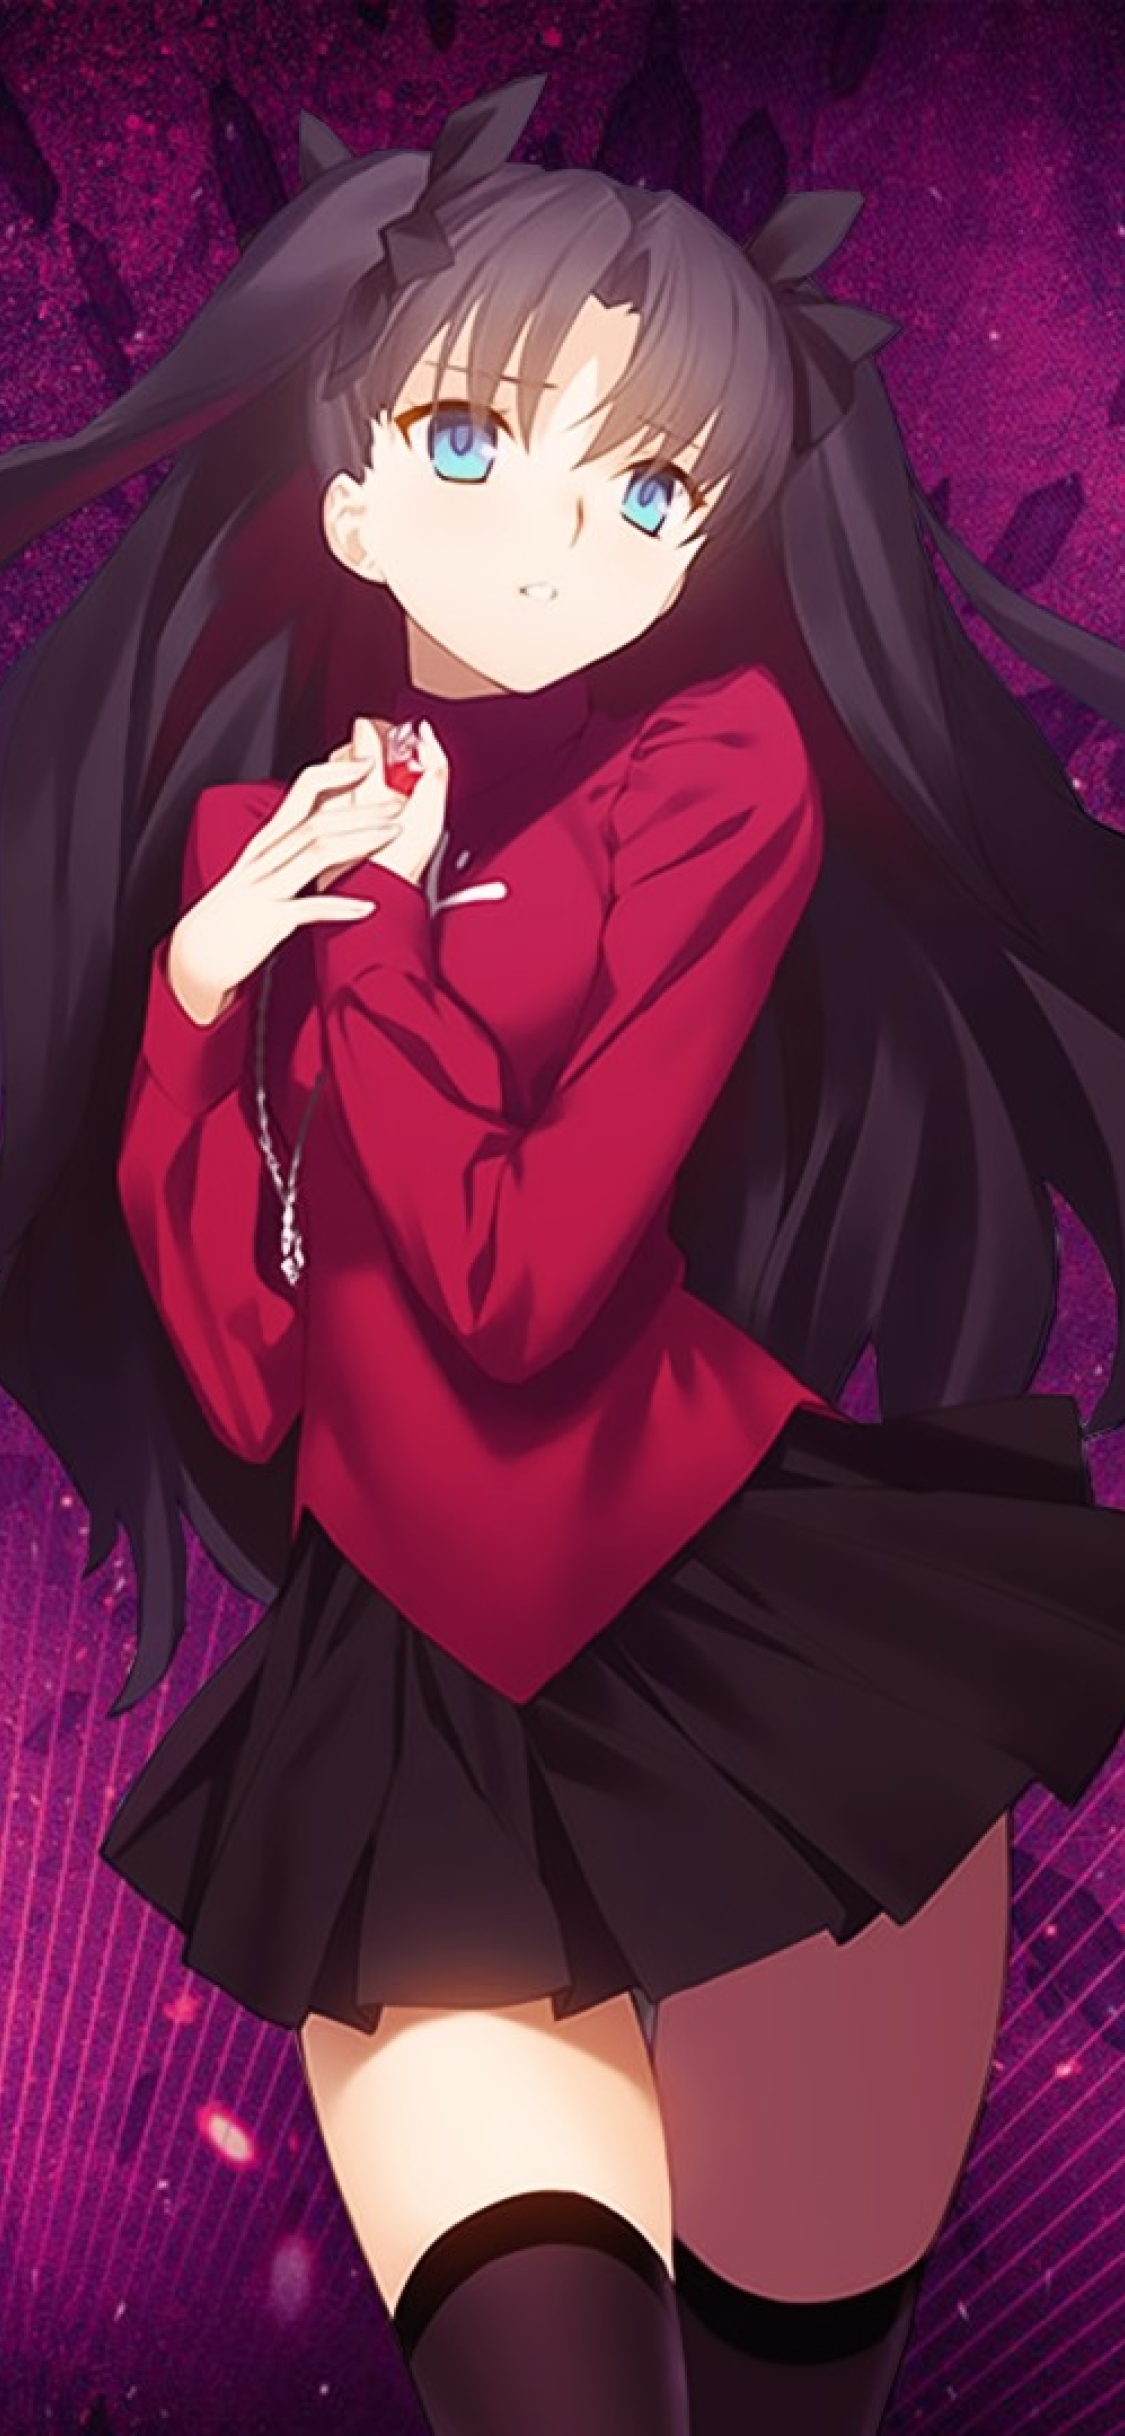 1125x2436 Rin Tohsaka Fate Stay Night Unlimited Blade Works Iphone Xs Iphone 10 Iphone X Wallpaper Hd Anime 4k Wallpapers Images Photos And Background